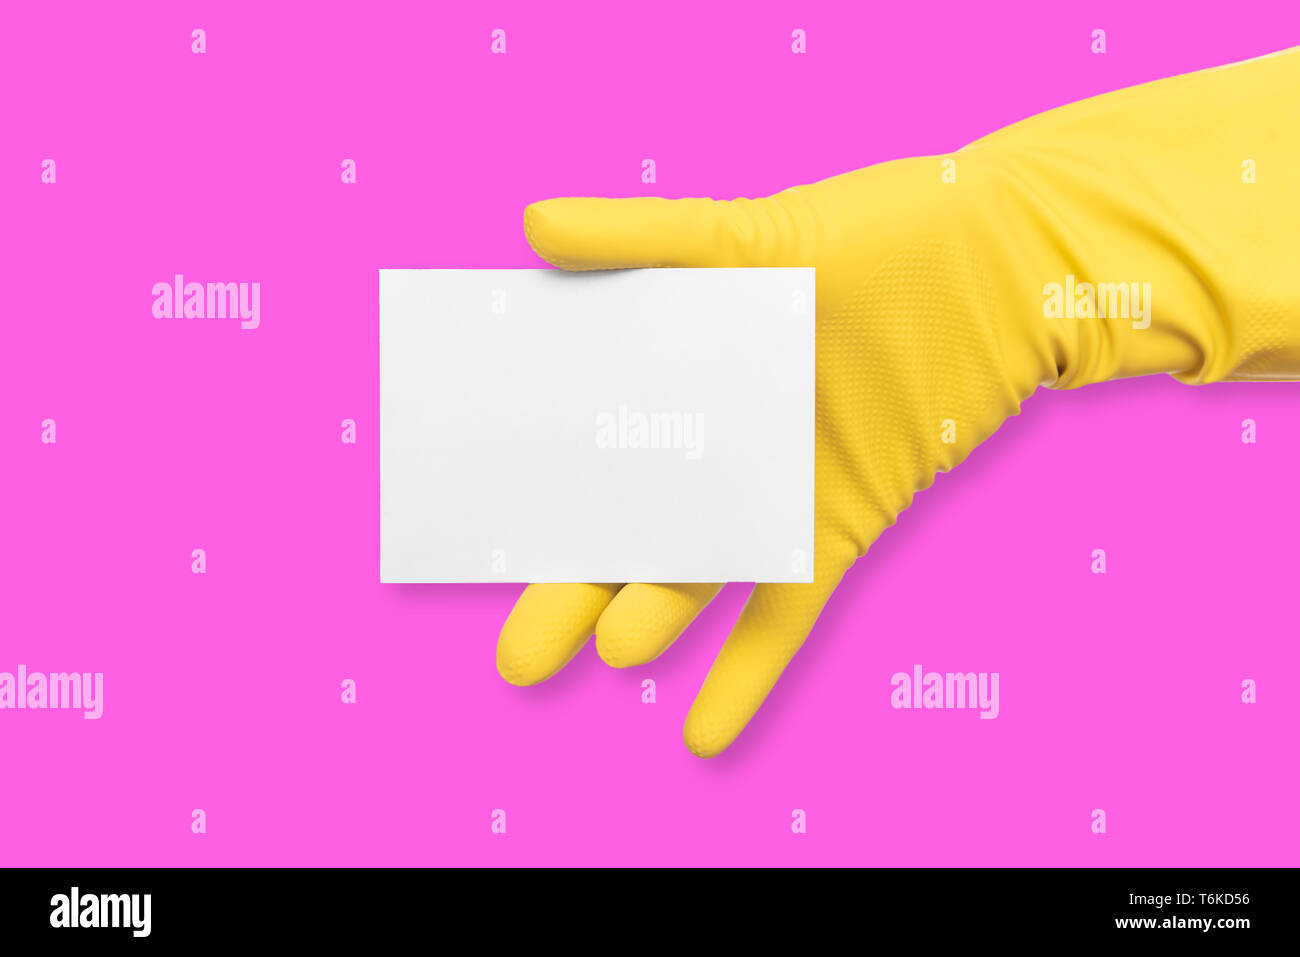 A rubber-gloved hand holds a white blank business card on pink background. Stock Photo